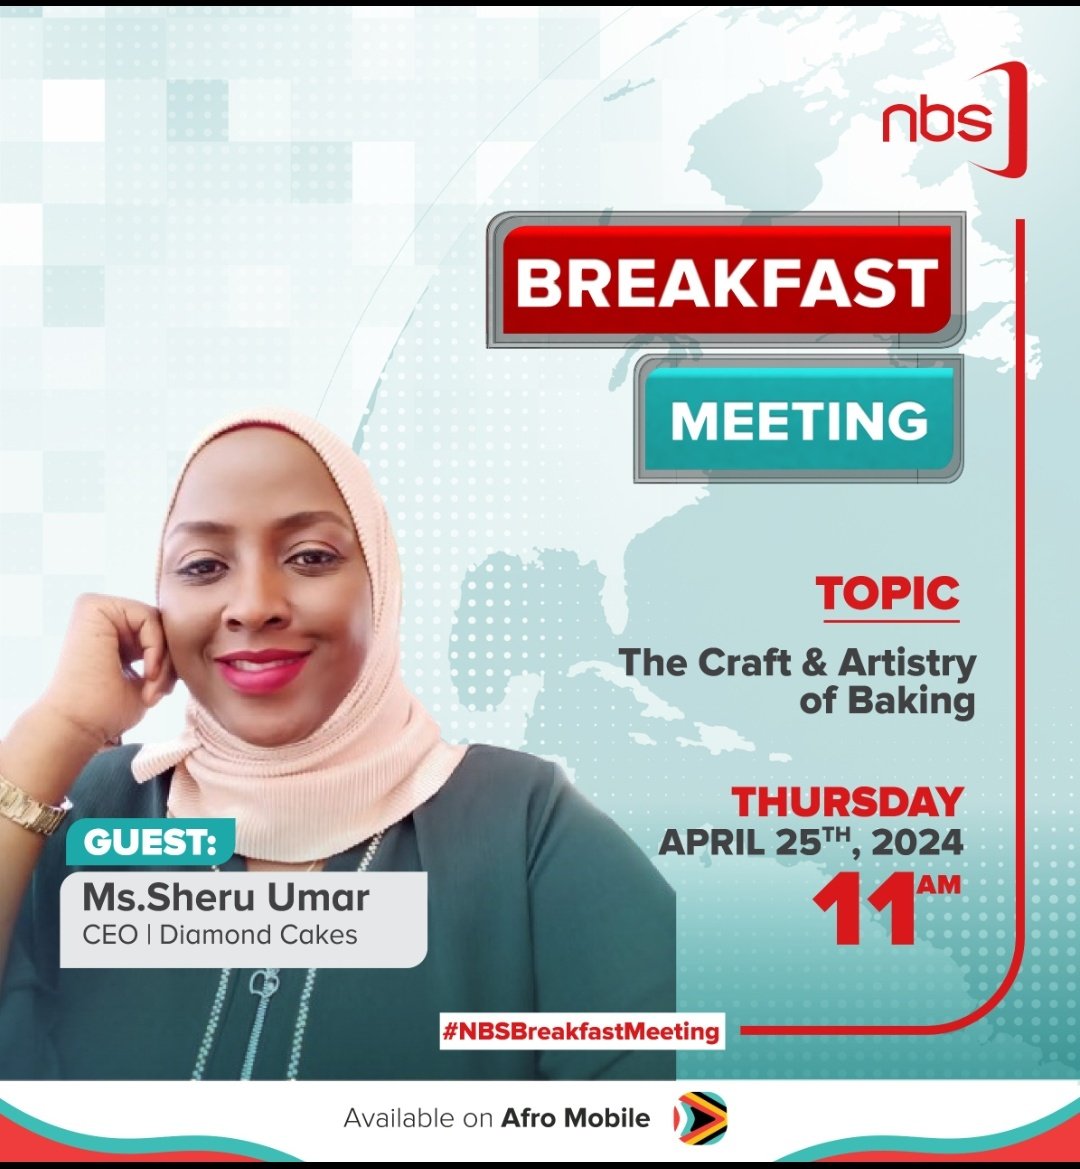 Every journey begins with a PLAN  then execution takes place, persistence and patience , having faith in Allah  automatically Success is the ultimate panacea. Dont miss to CEO of @diamondcakes256  live on @nbstv 
#NBSBreakfastMeeting
Am really proud of you big sis